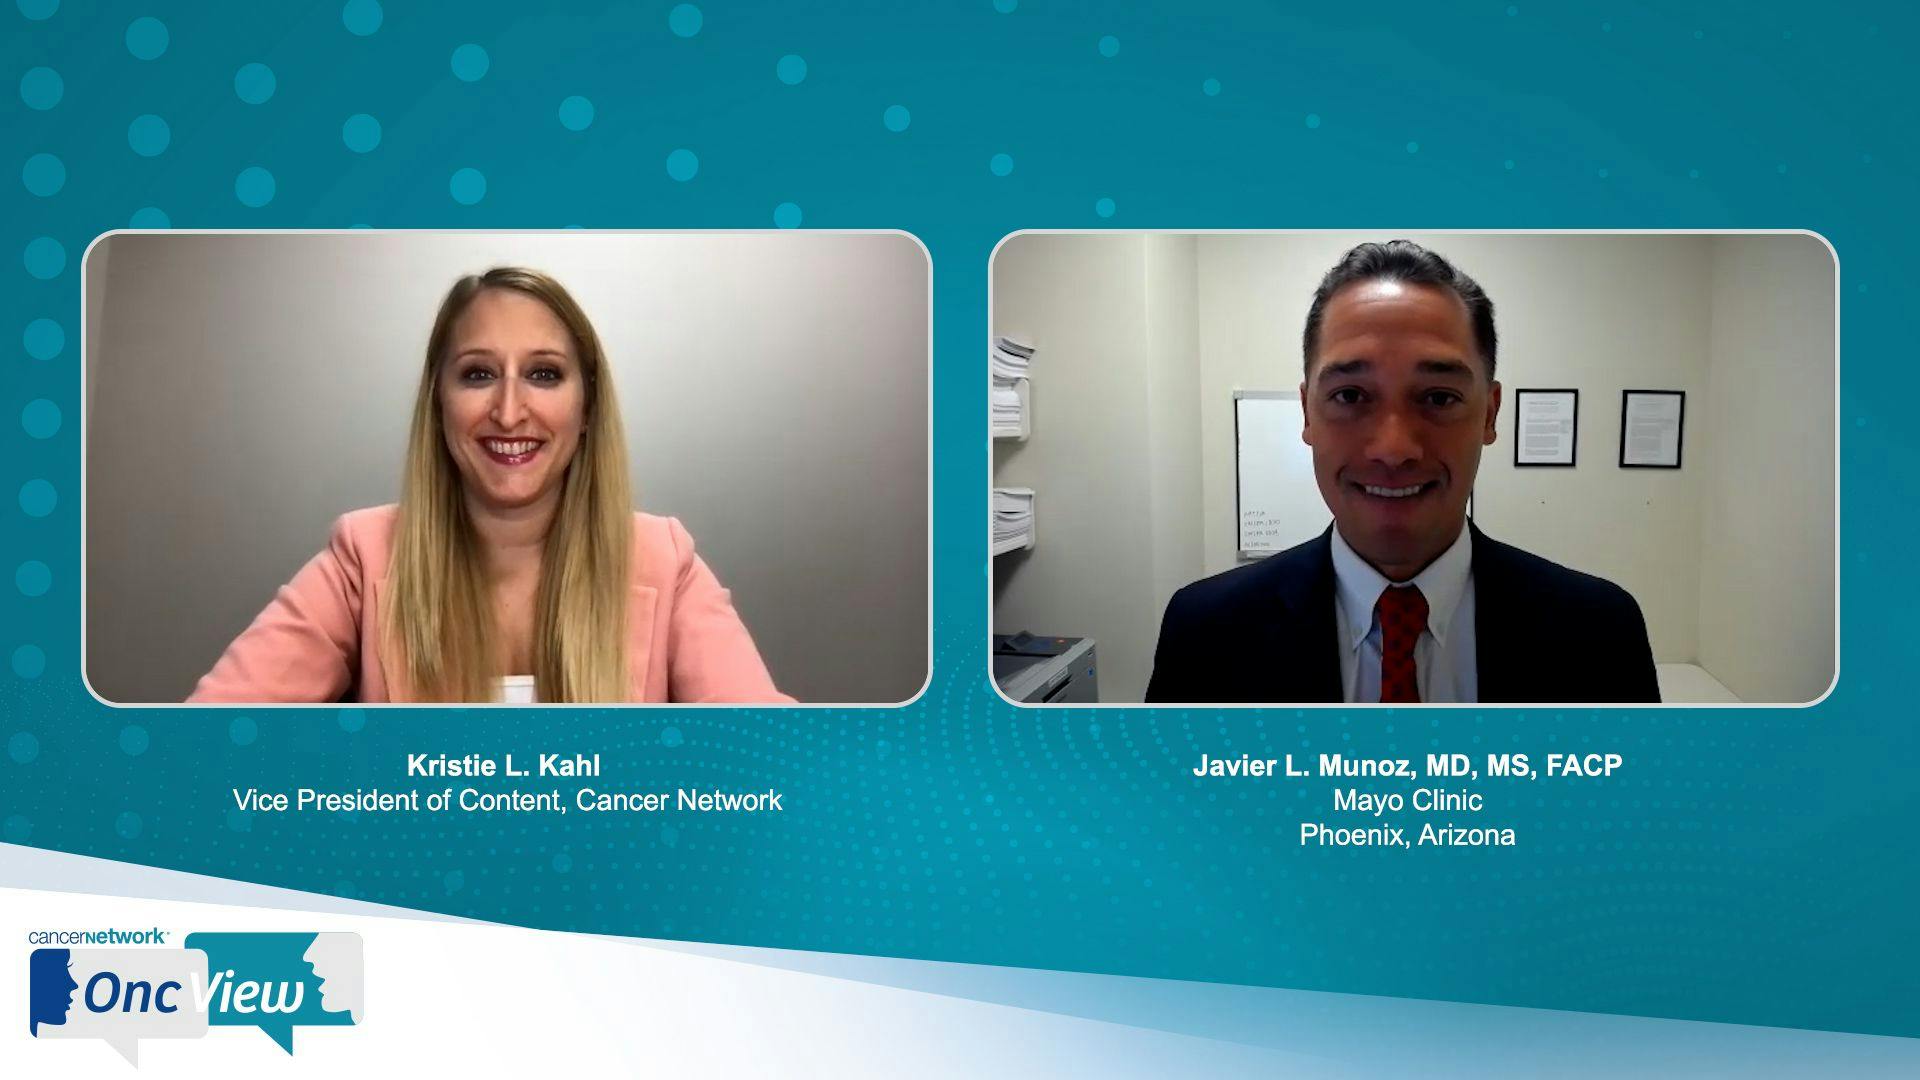 Current Treatment Options for Relapsed/Refractory Follicular Lymphoma